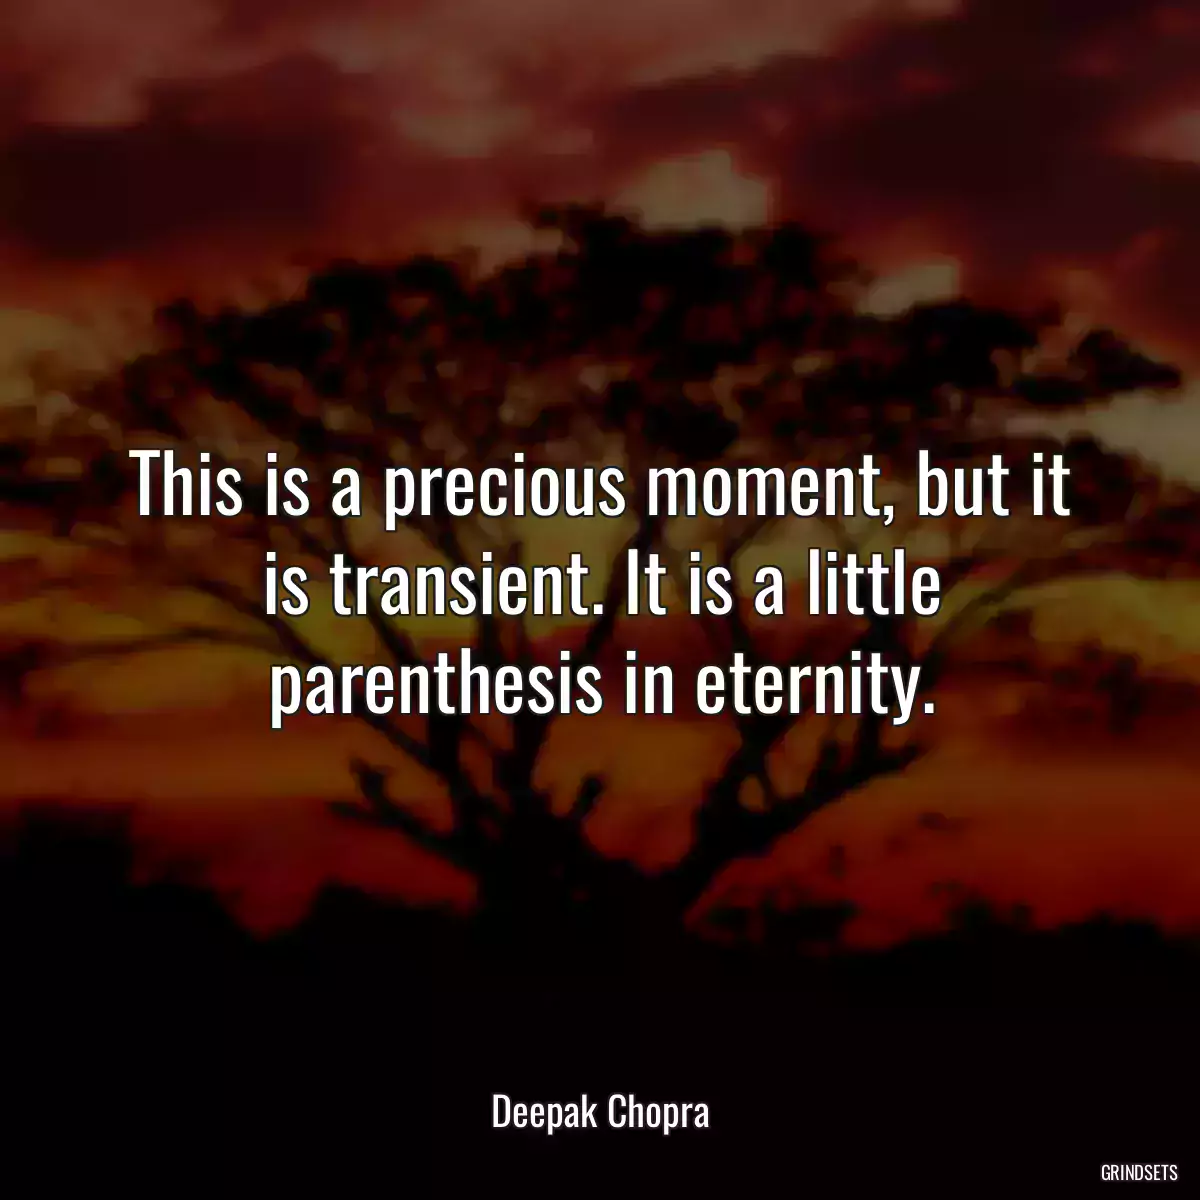 This is a precious moment, but it is transient. It is a little parenthesis in eternity.